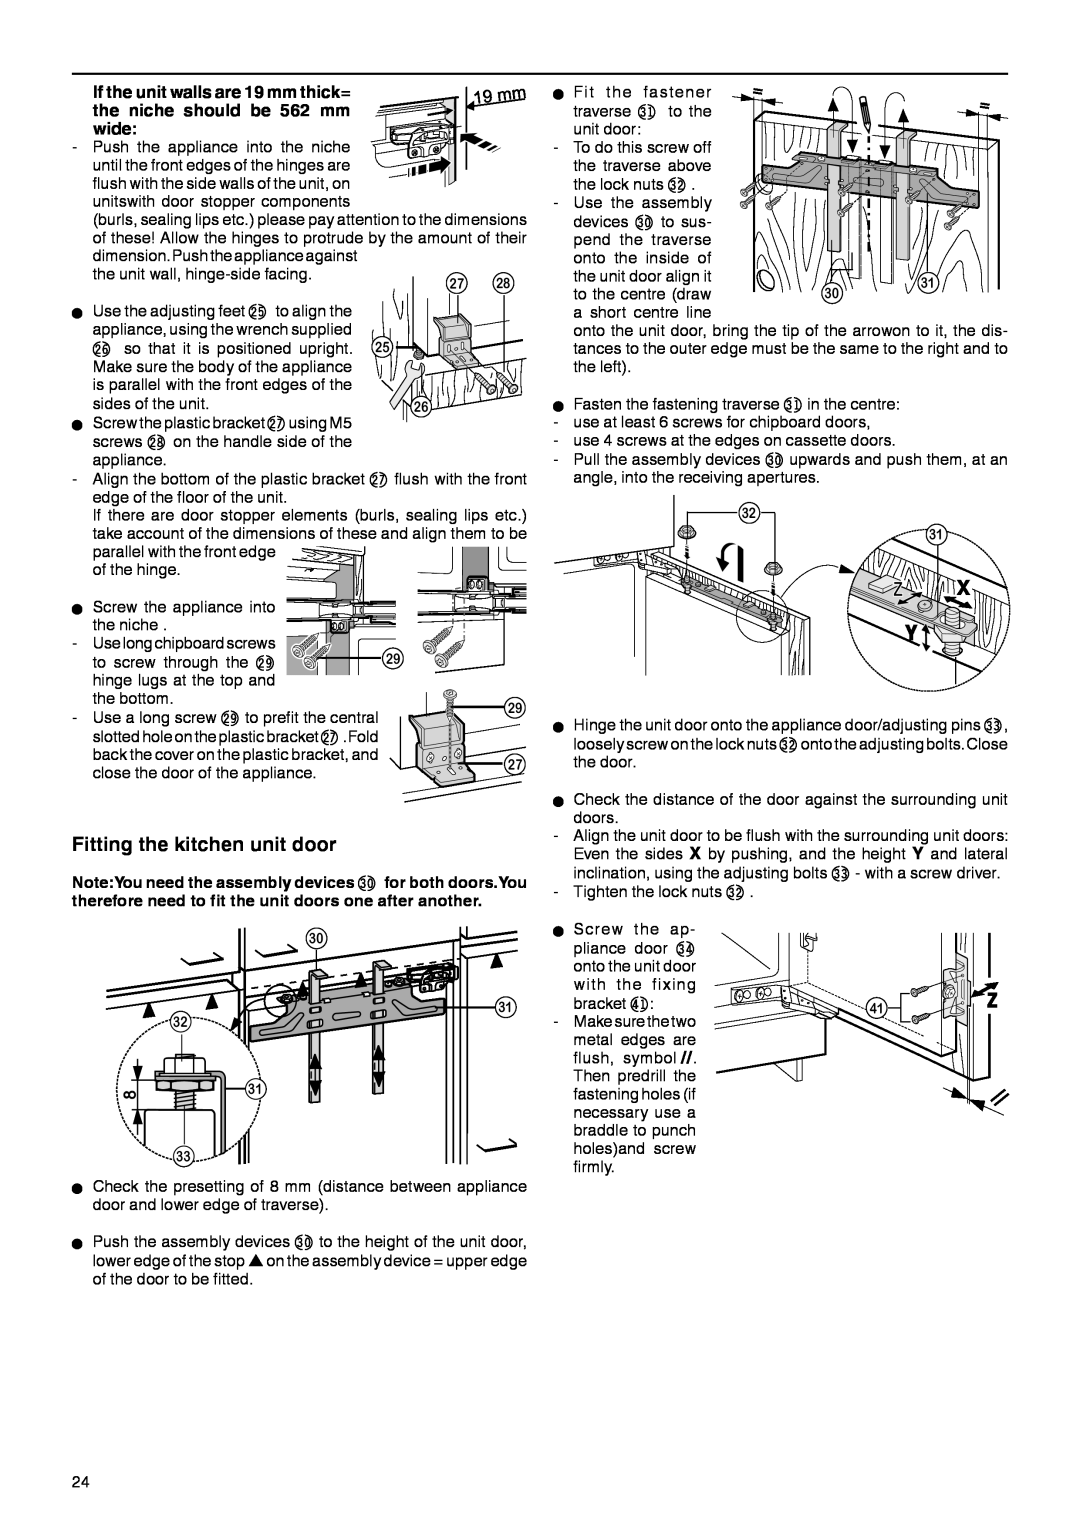 Liebherr 7082 532-00 installation instructions Fitting the kitchen unit door, the niche should be 562 mm, wide 